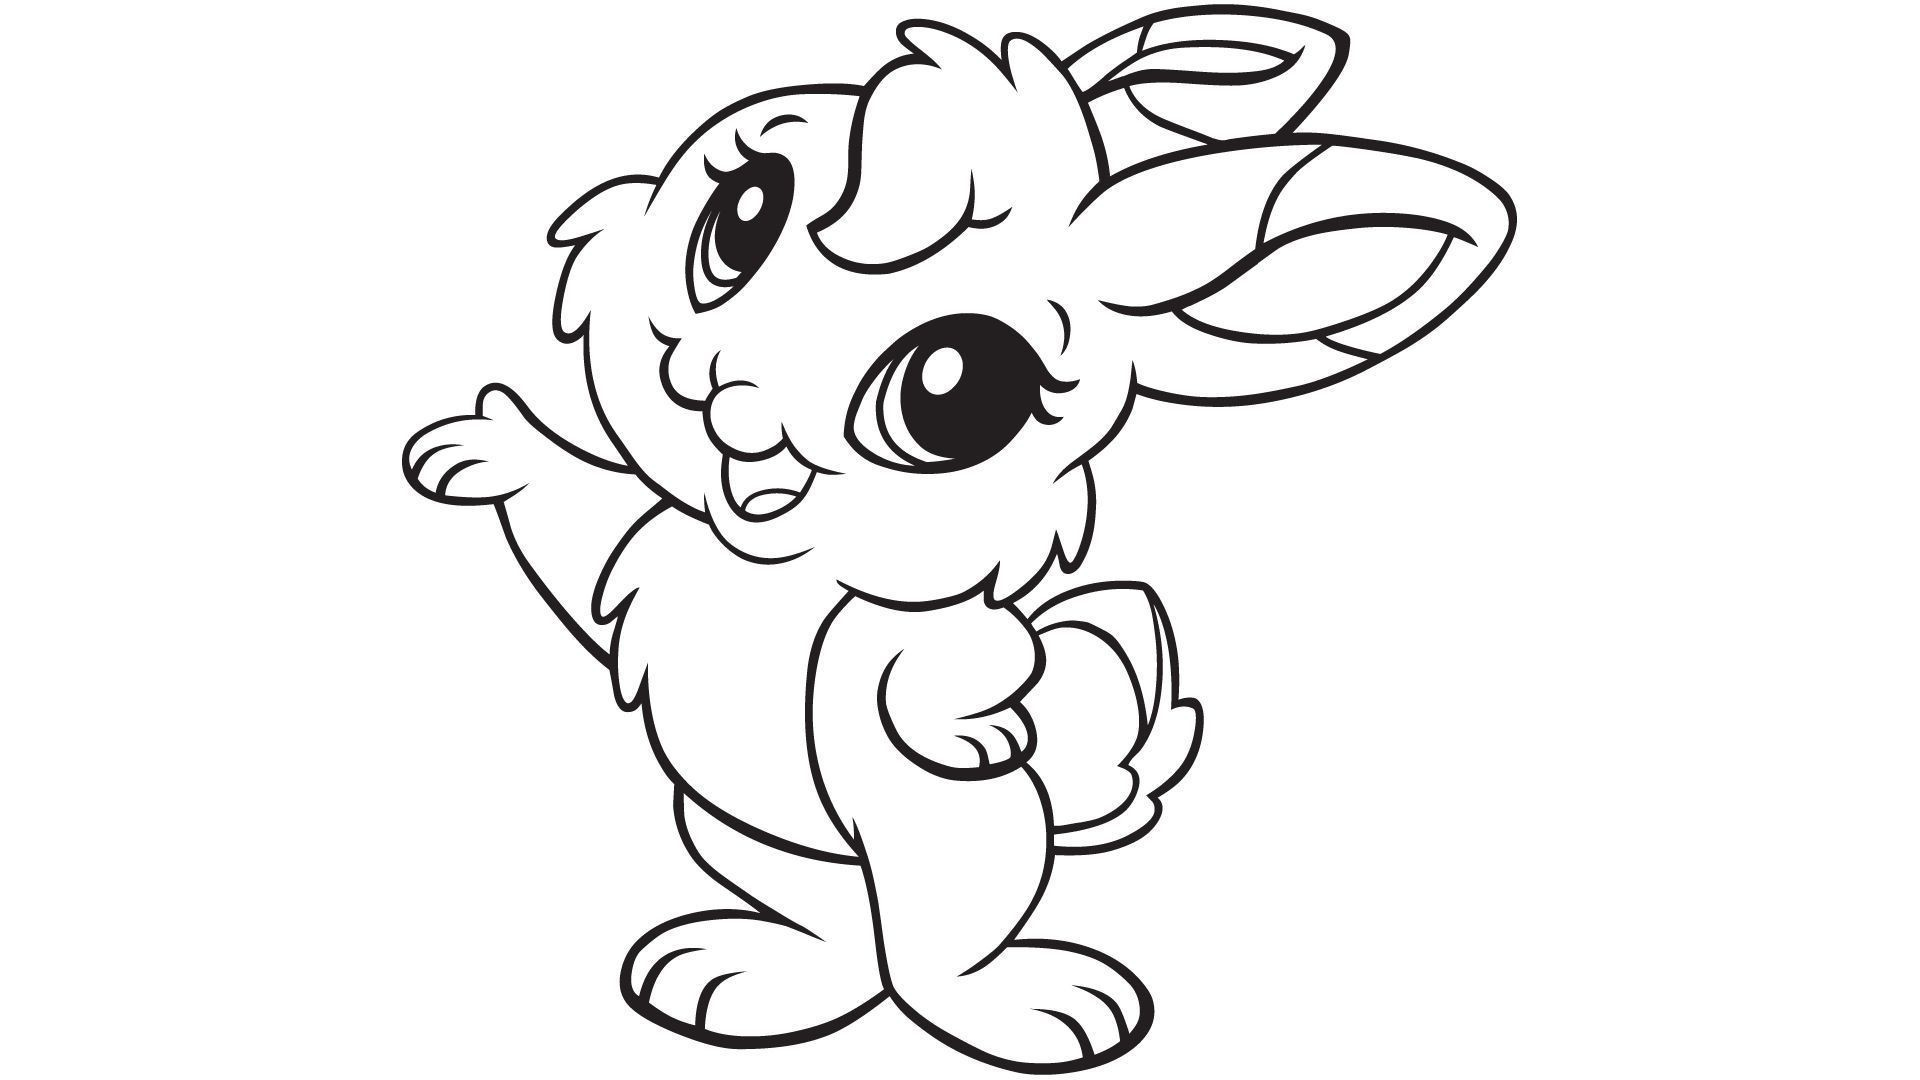 Free Rabbit Coloring Pages Coloring 43 Rabbit Coloring Pages Photo Inspirations